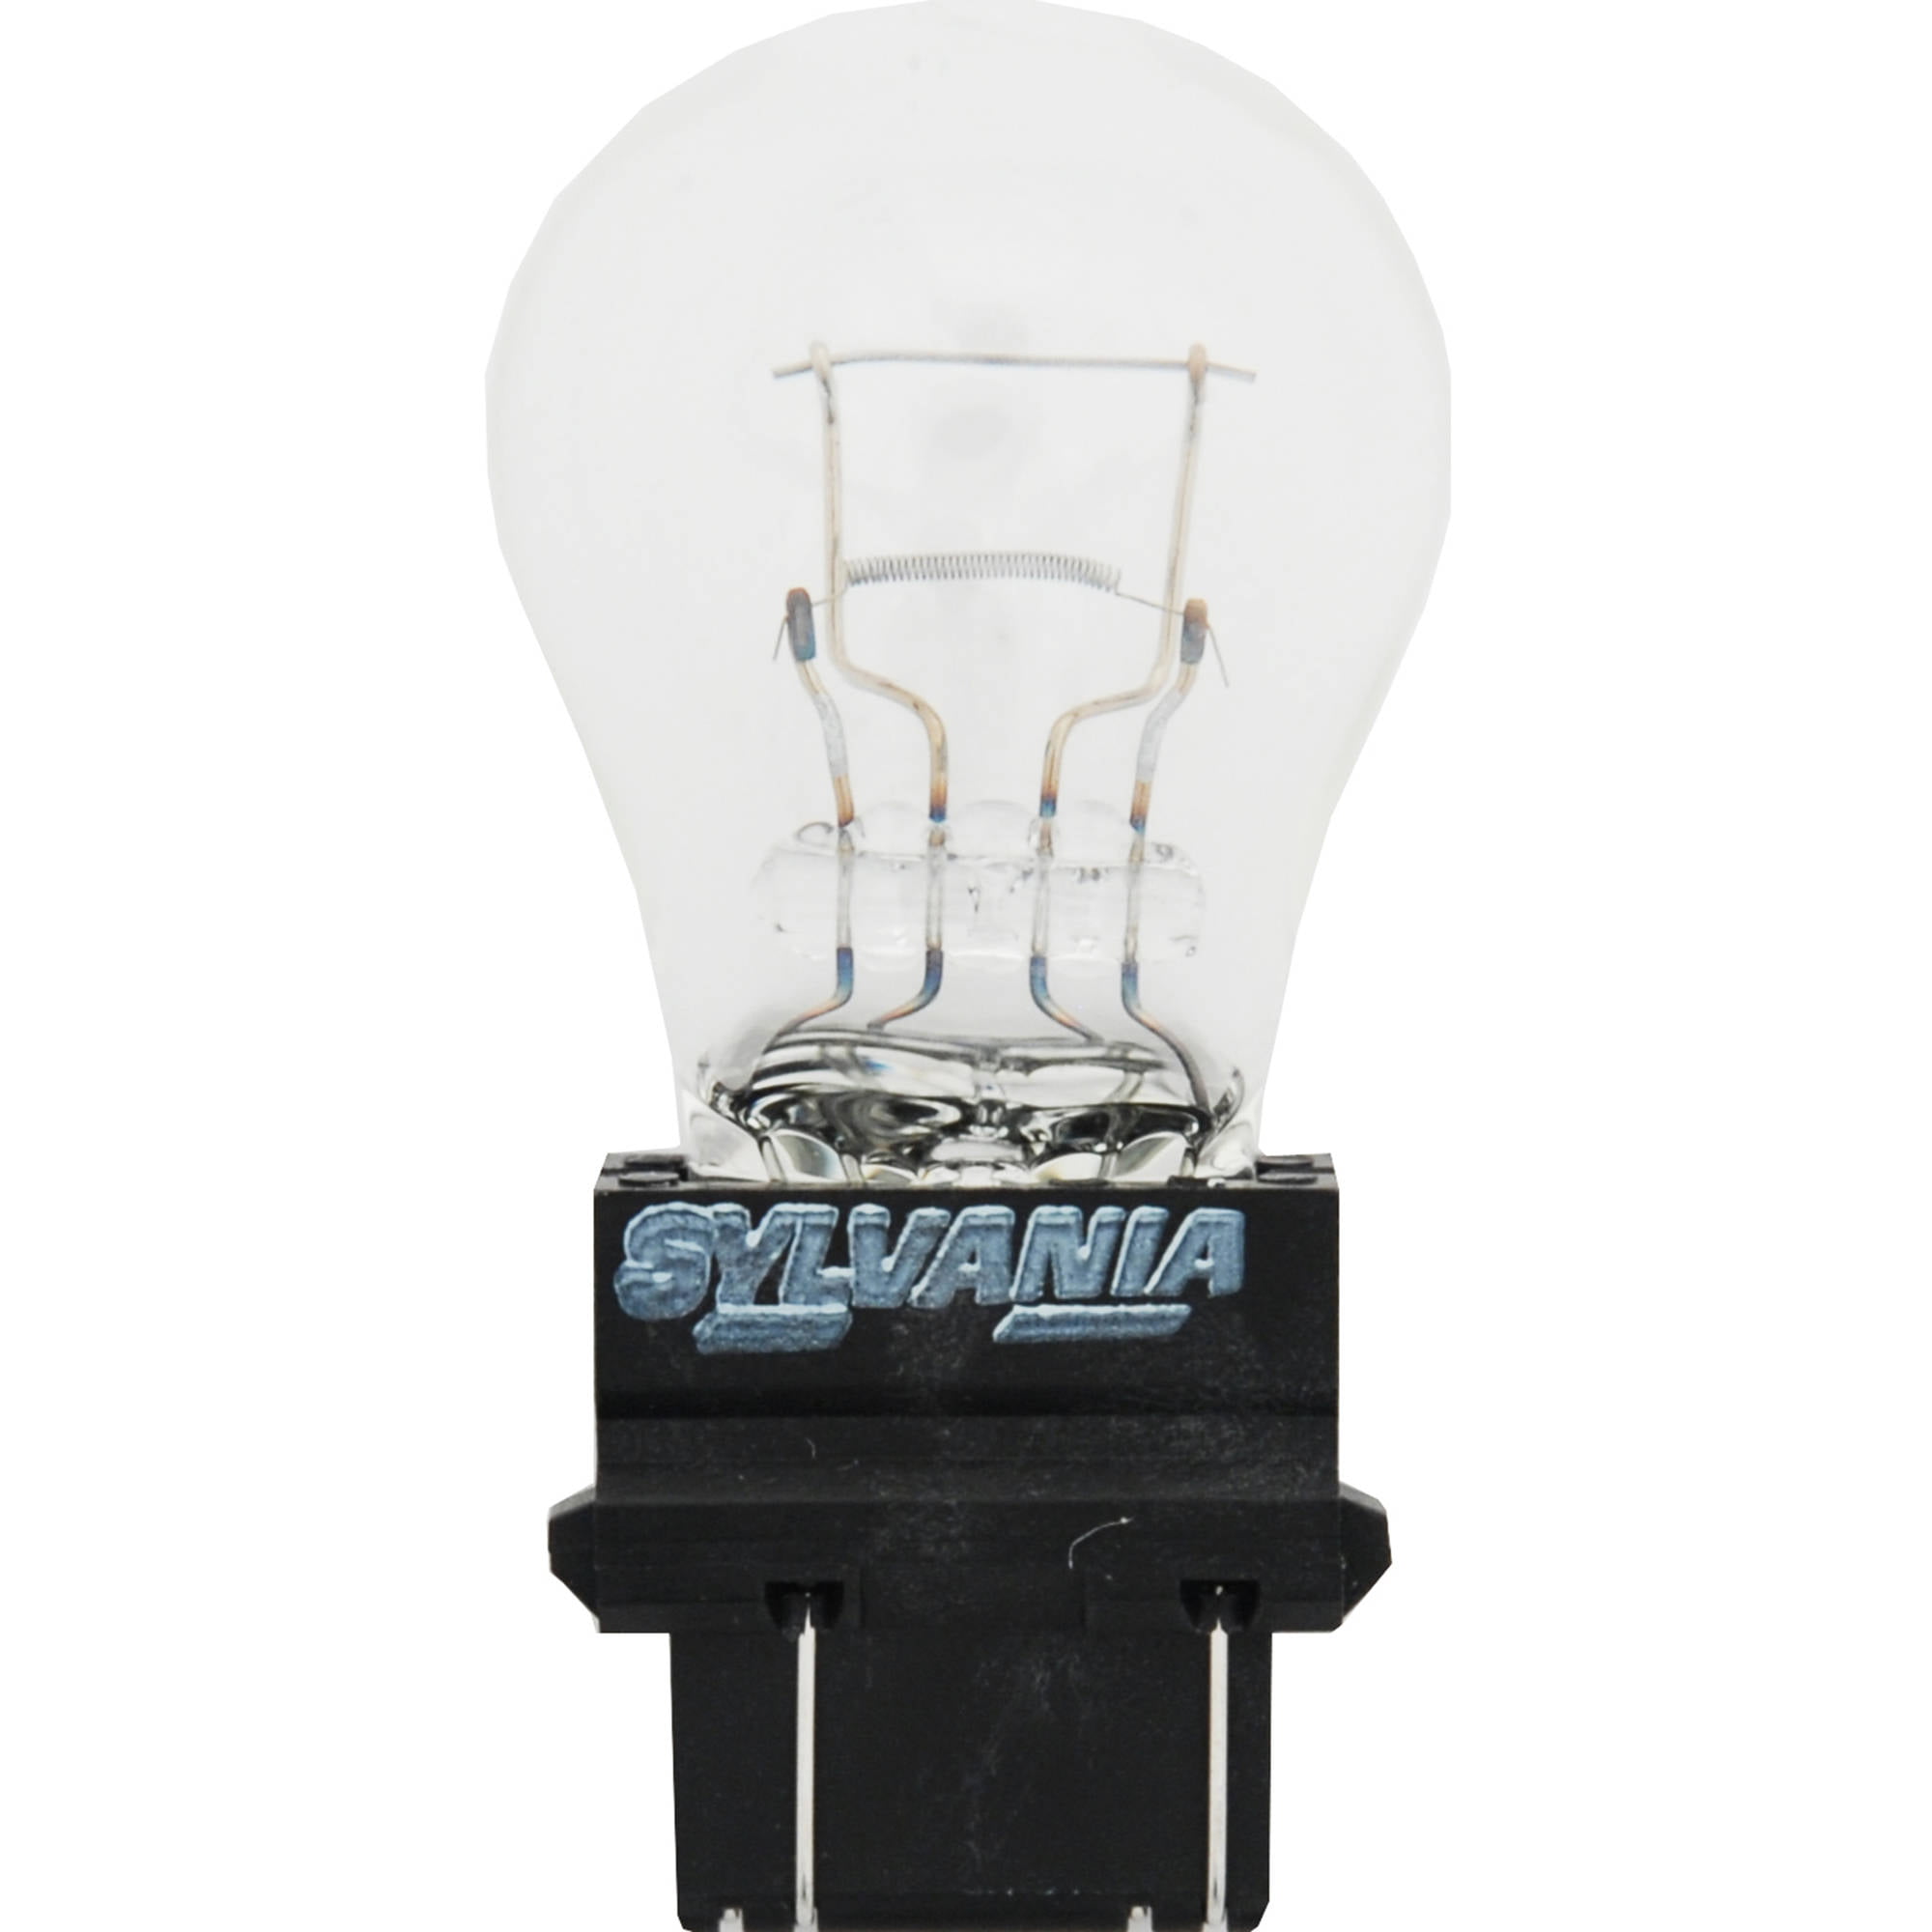 SYLVANIA Bulb and Back-Up/Reverse Lights 3057 Long Life Miniature Contains 2 Bulbs Ideal for Daytime Running Lights DRL 